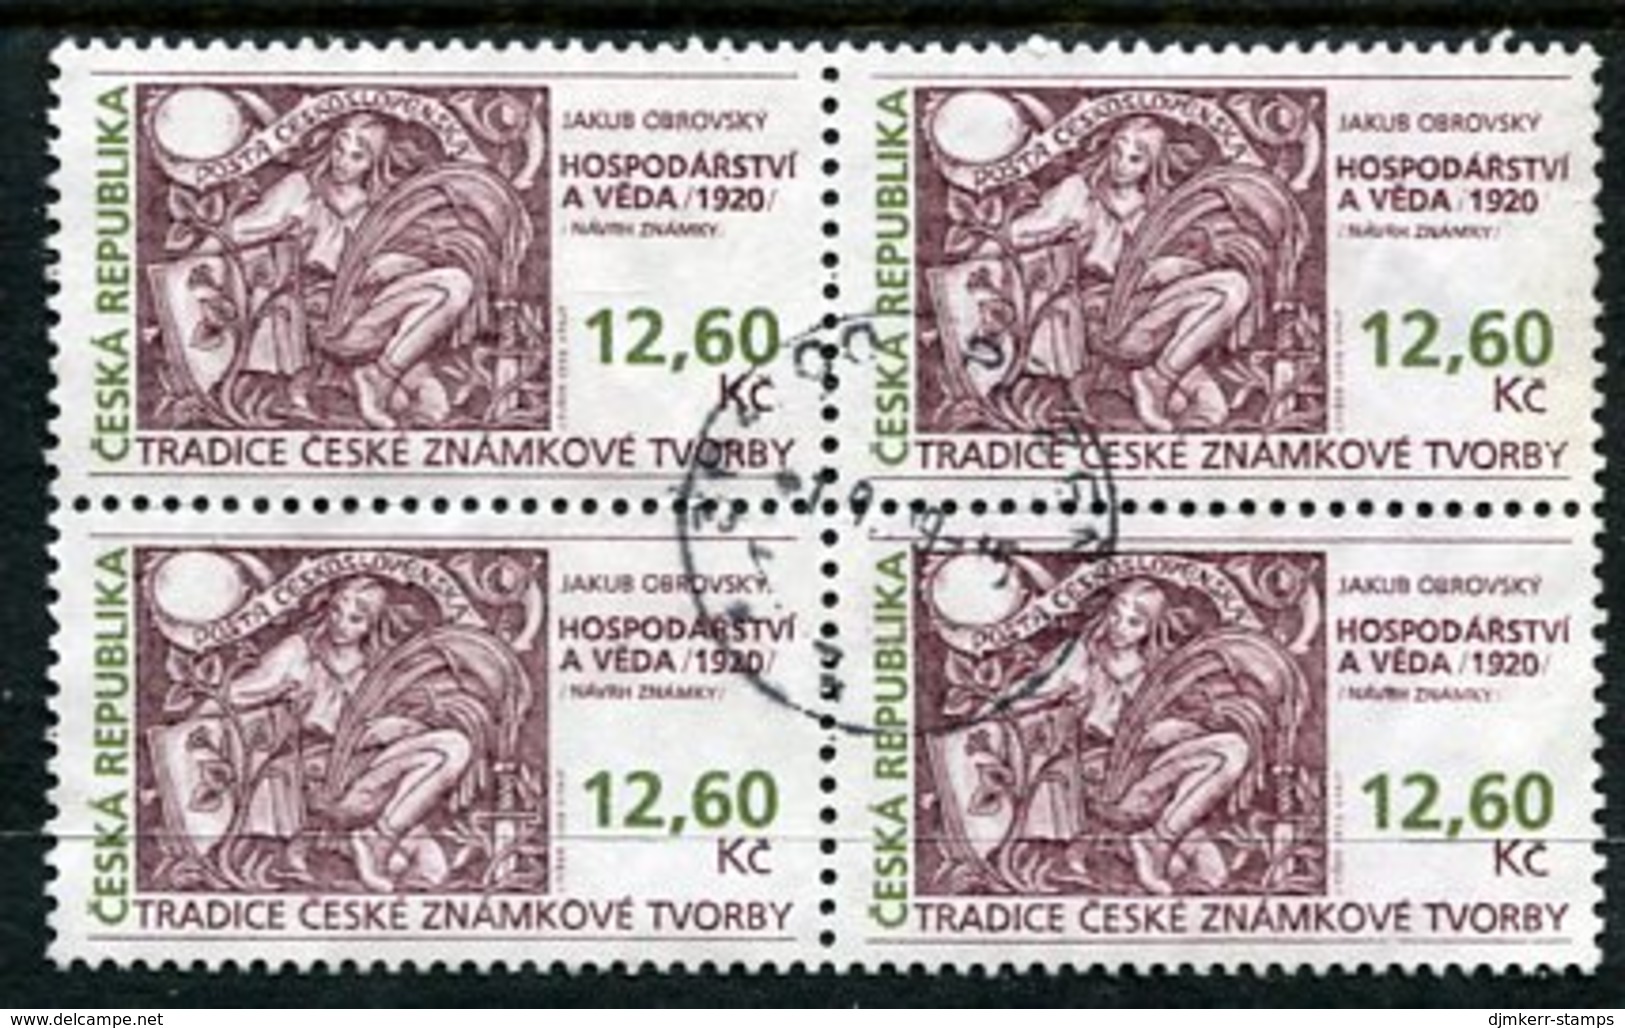 CZECH REPUBLIC 1998 Stamp Day  Used Block Of 4.  Michel 165 - Usados